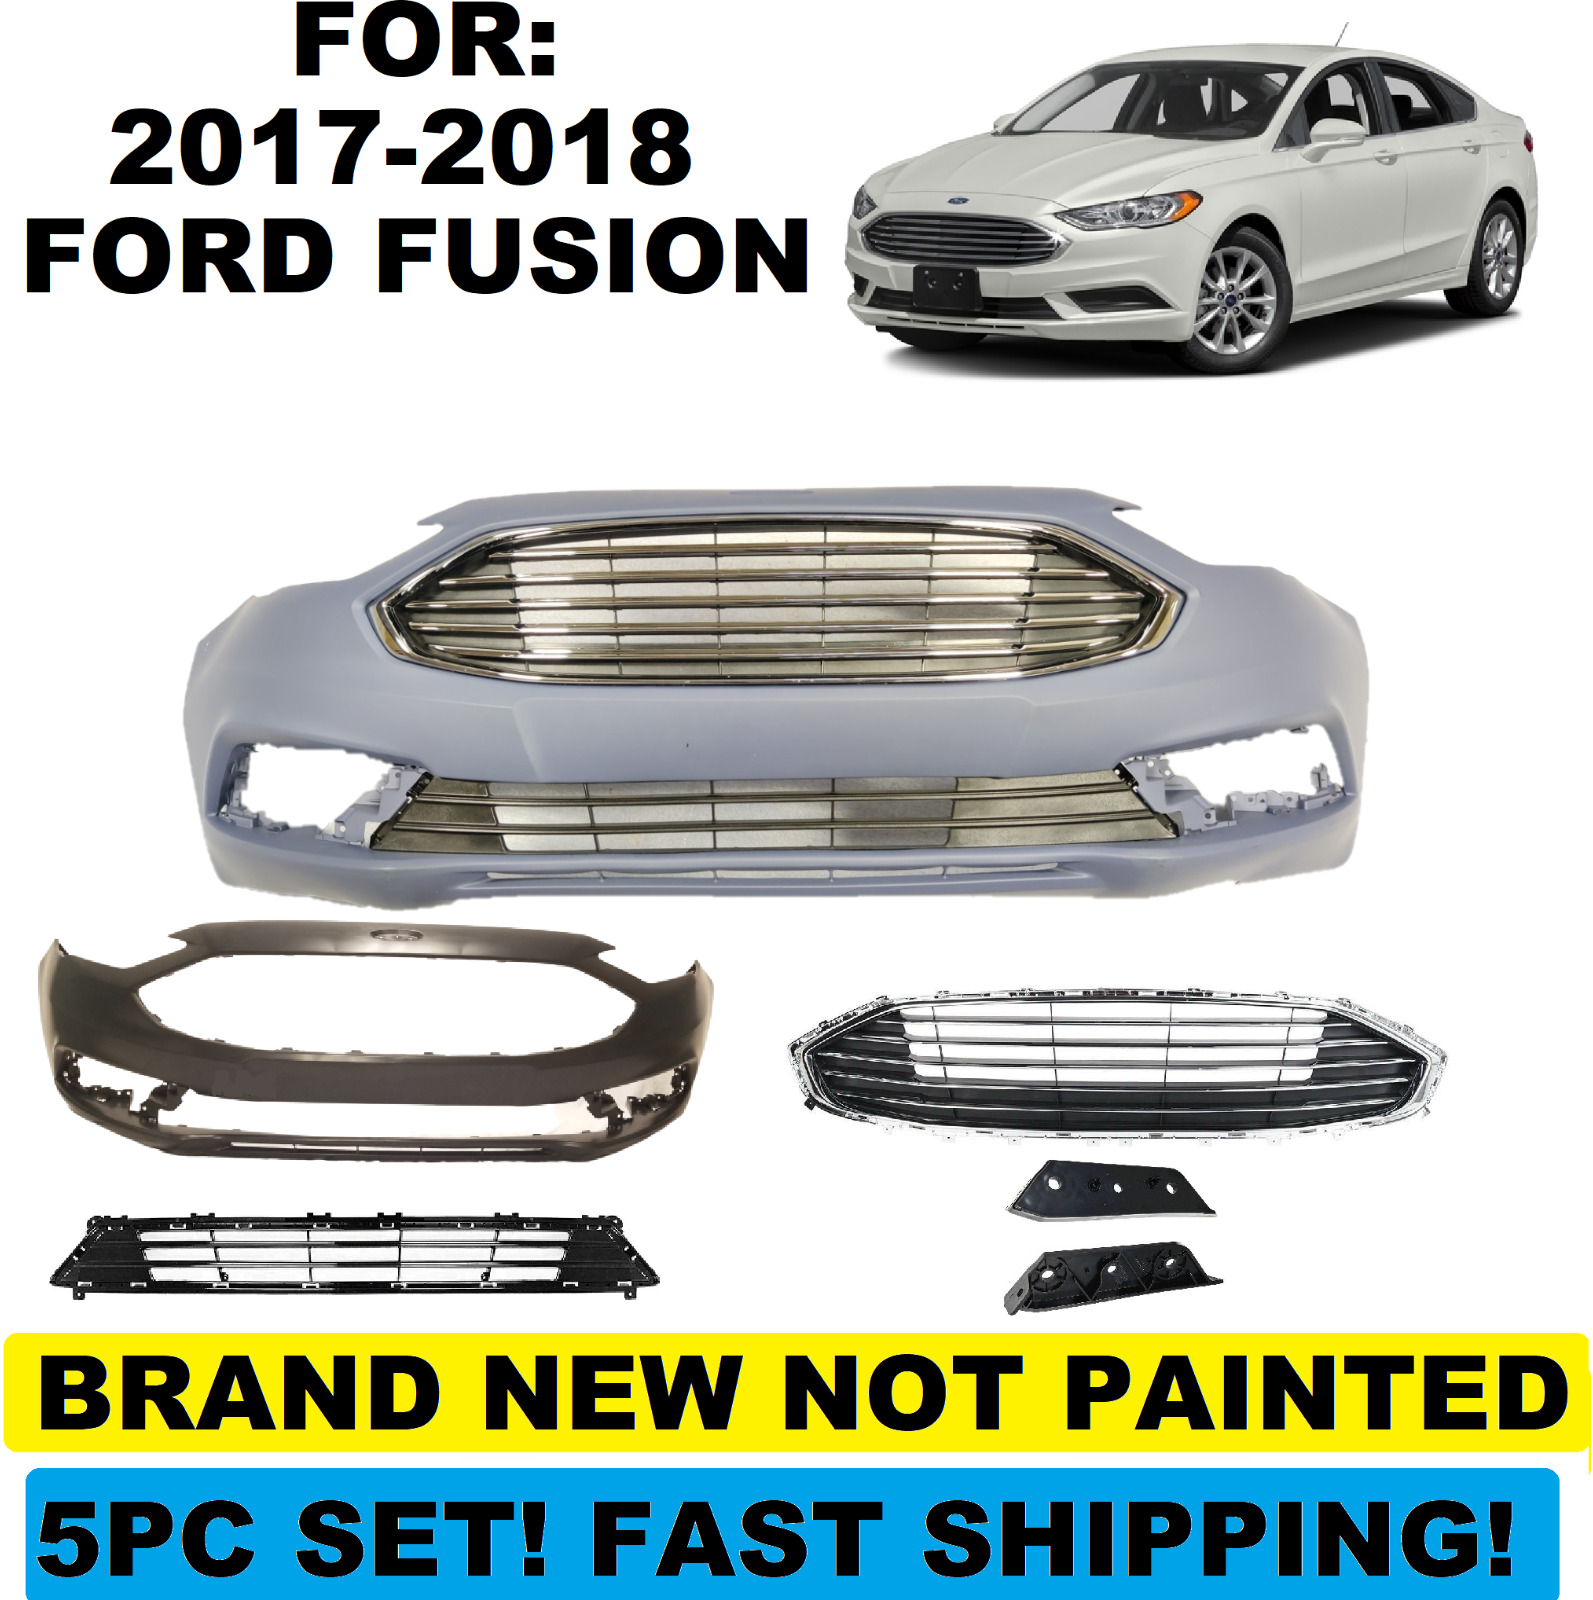 FOR 2017 2018 FORD FUSION FRONT BUMPER